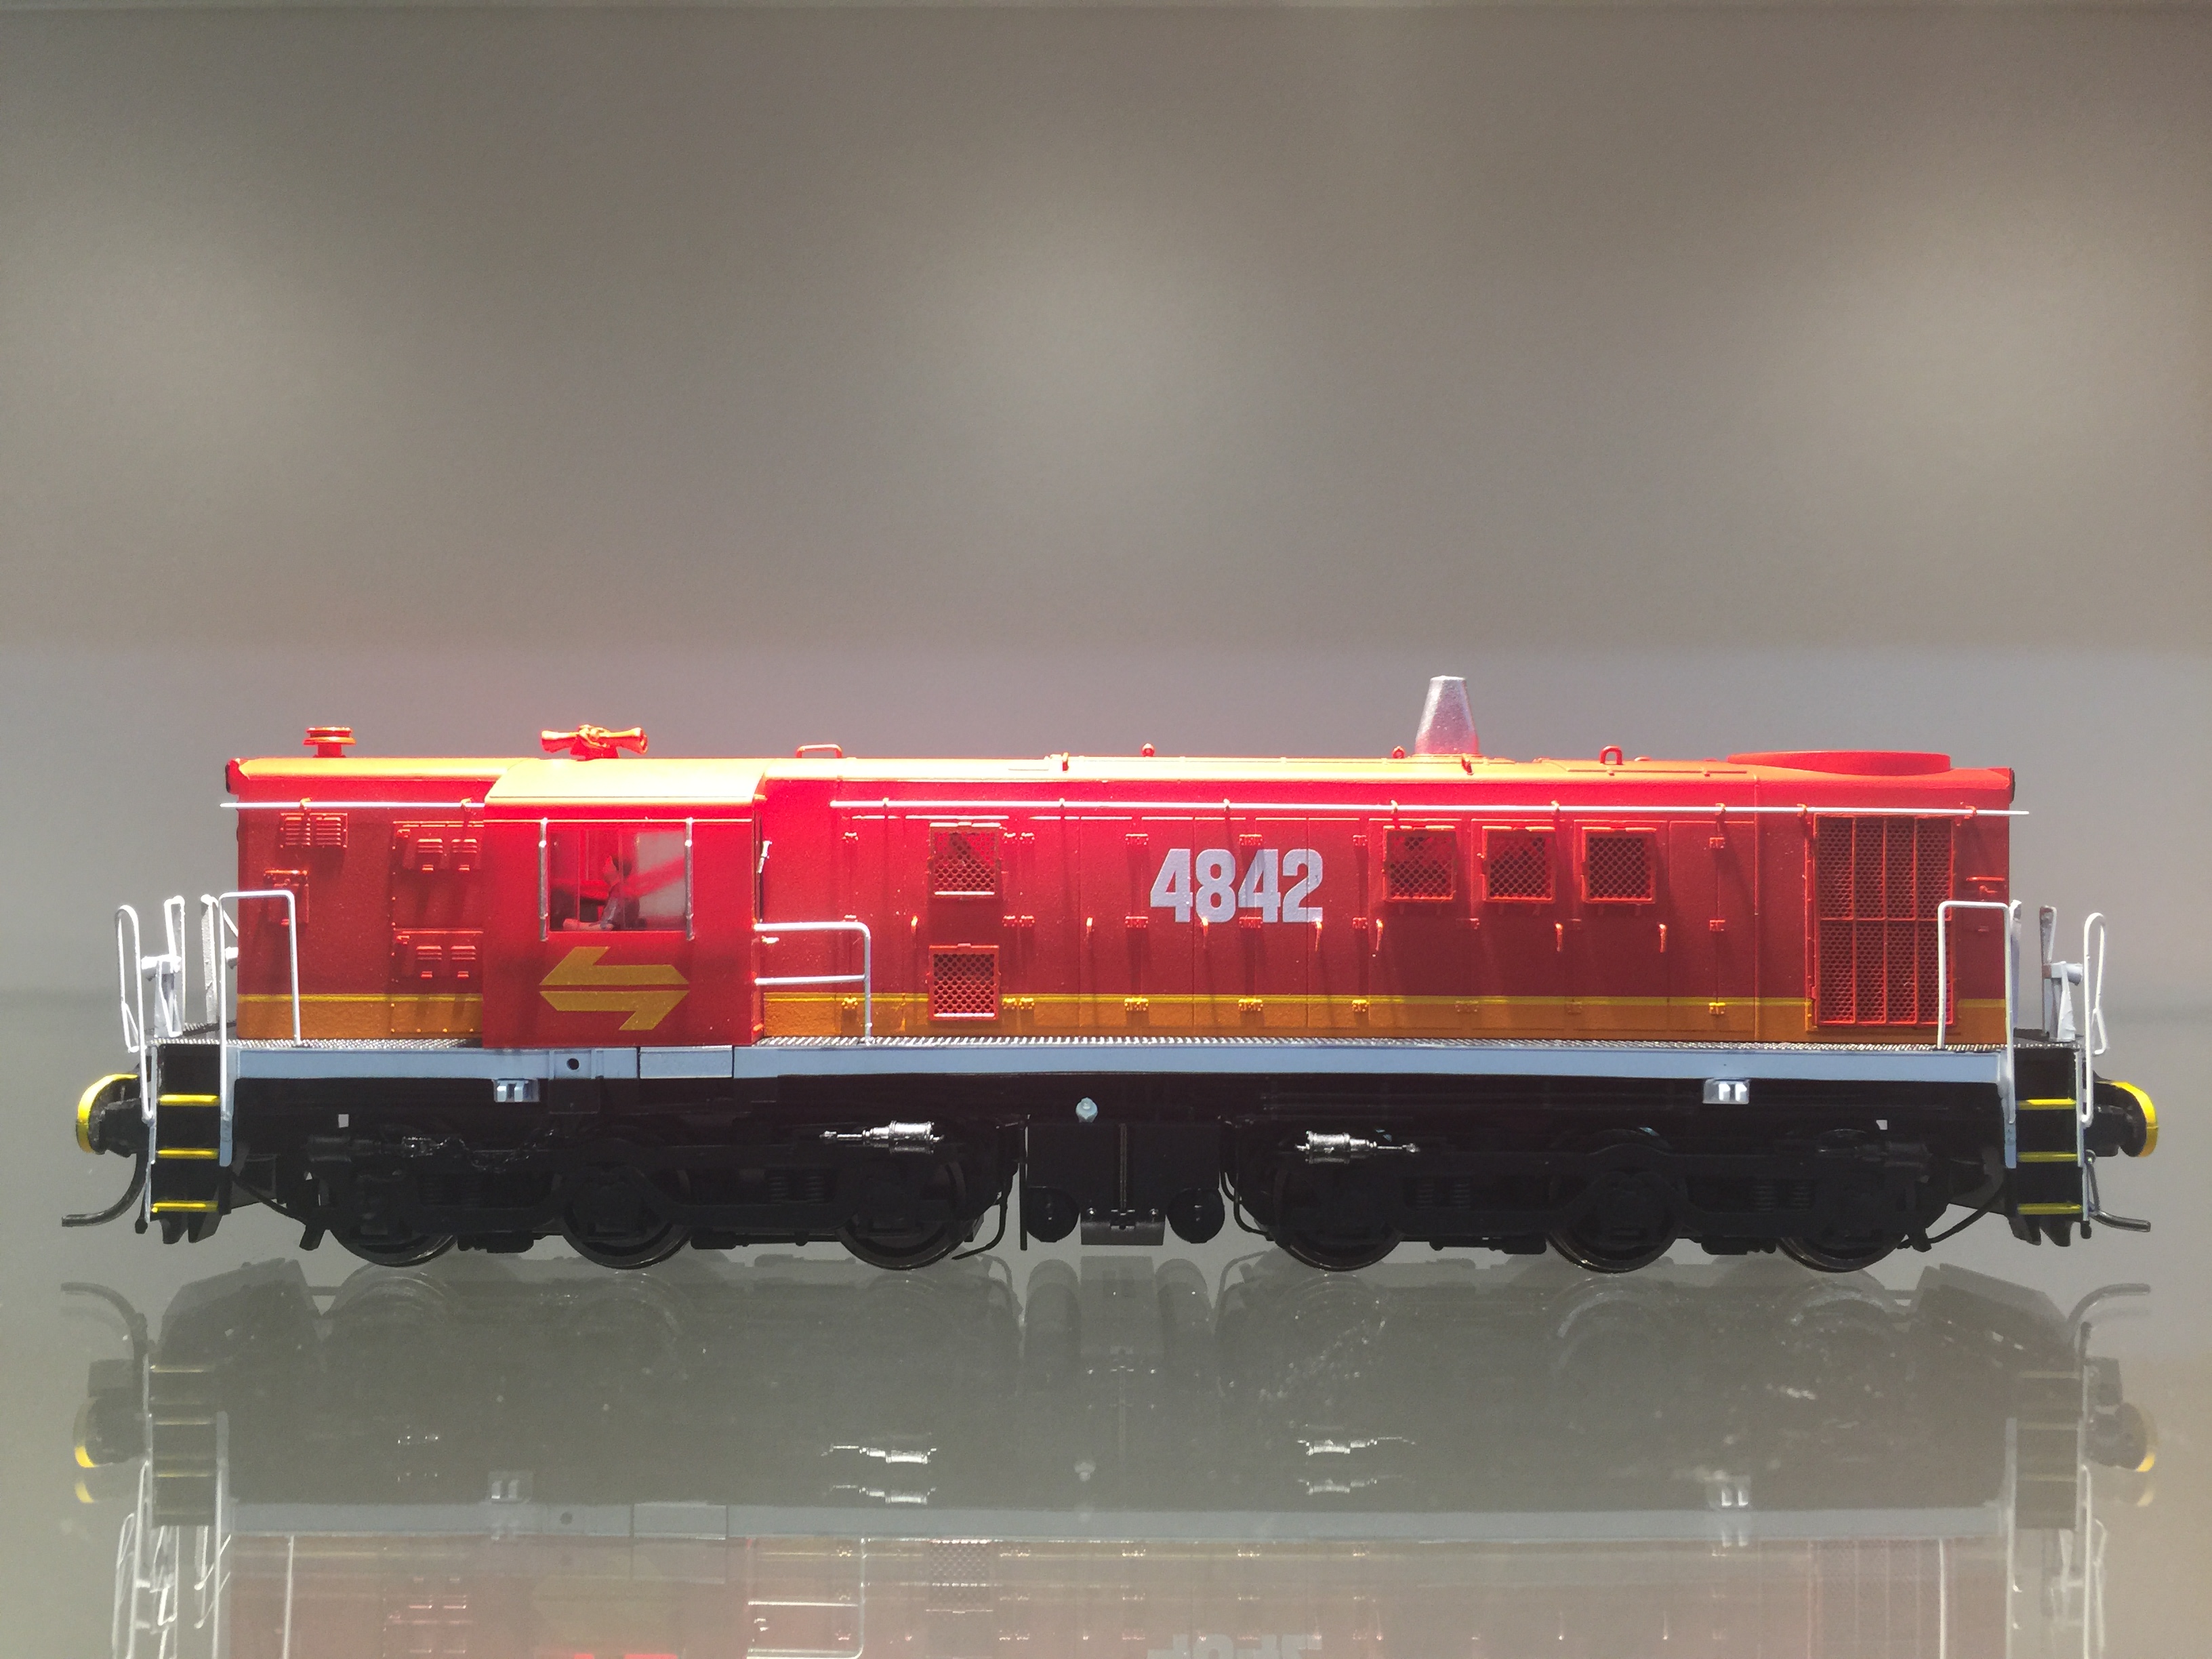 NEW ARRIVAL - TRAINORAMA 48 CLASS -  4842, CANDY WITH RED ROOF,  SPECIAL PRICE FOR ONLY $285 EACH